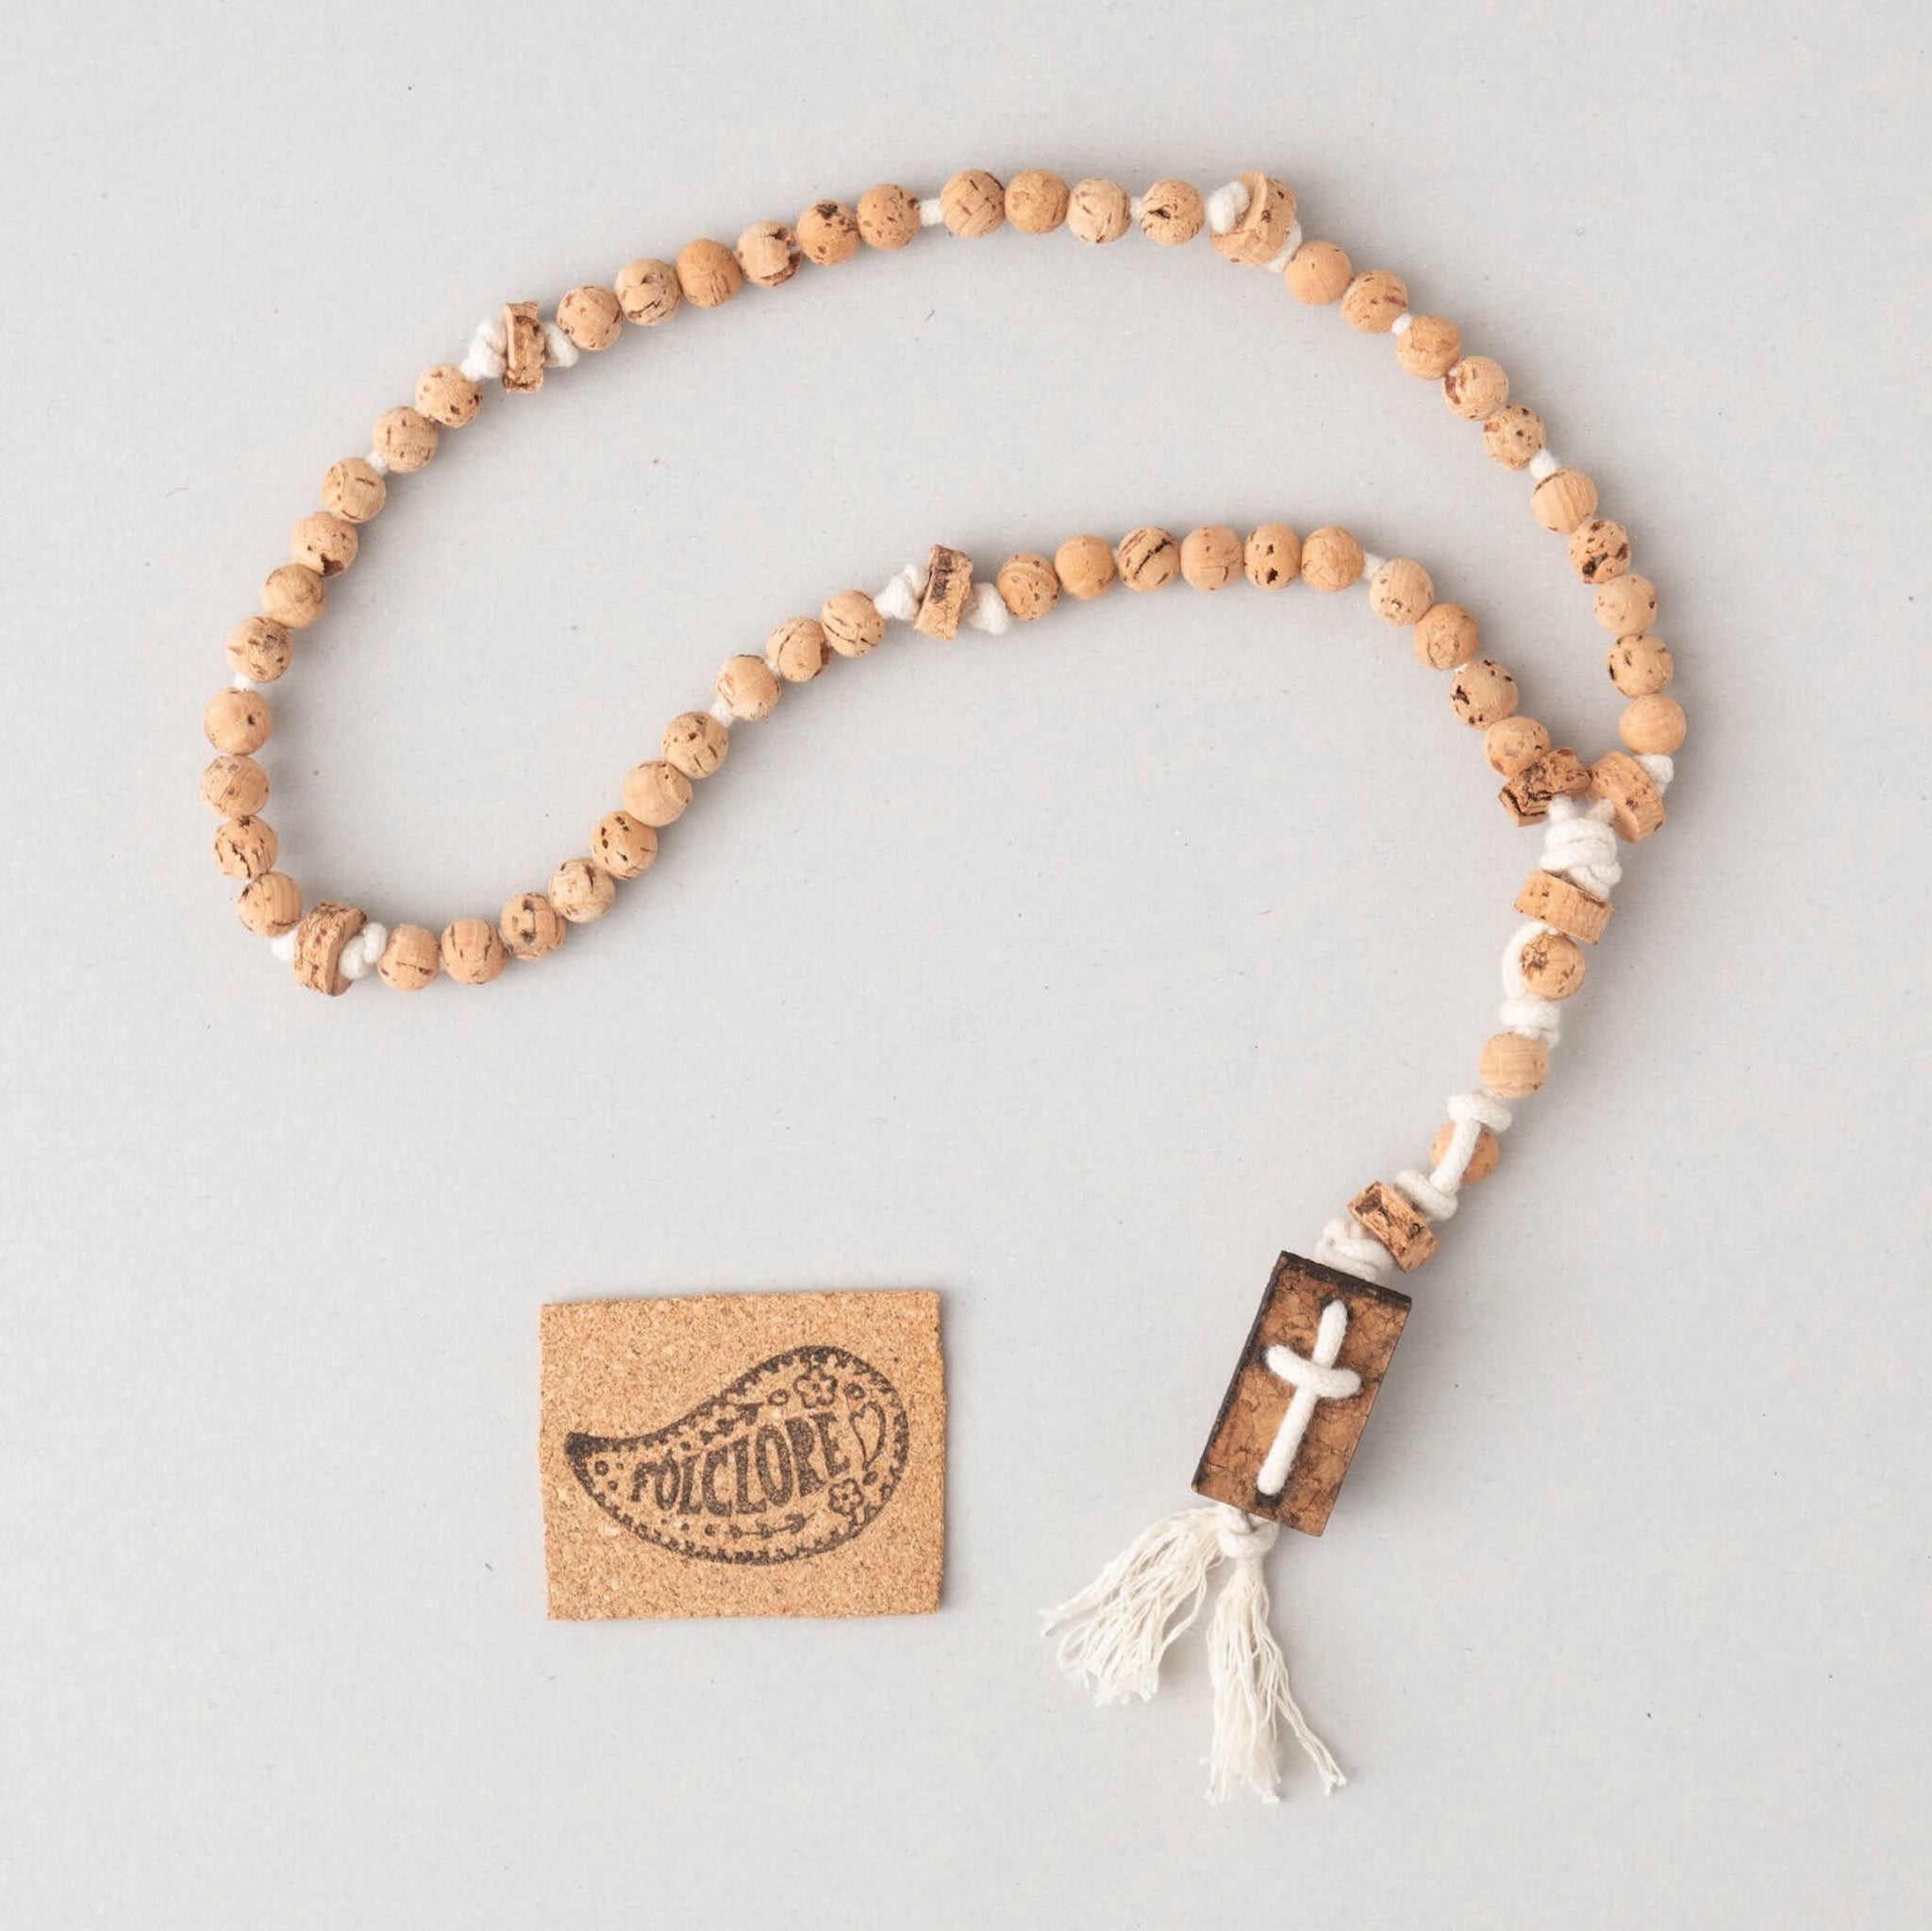 handcrafted beads cork rosary with unique cork cross